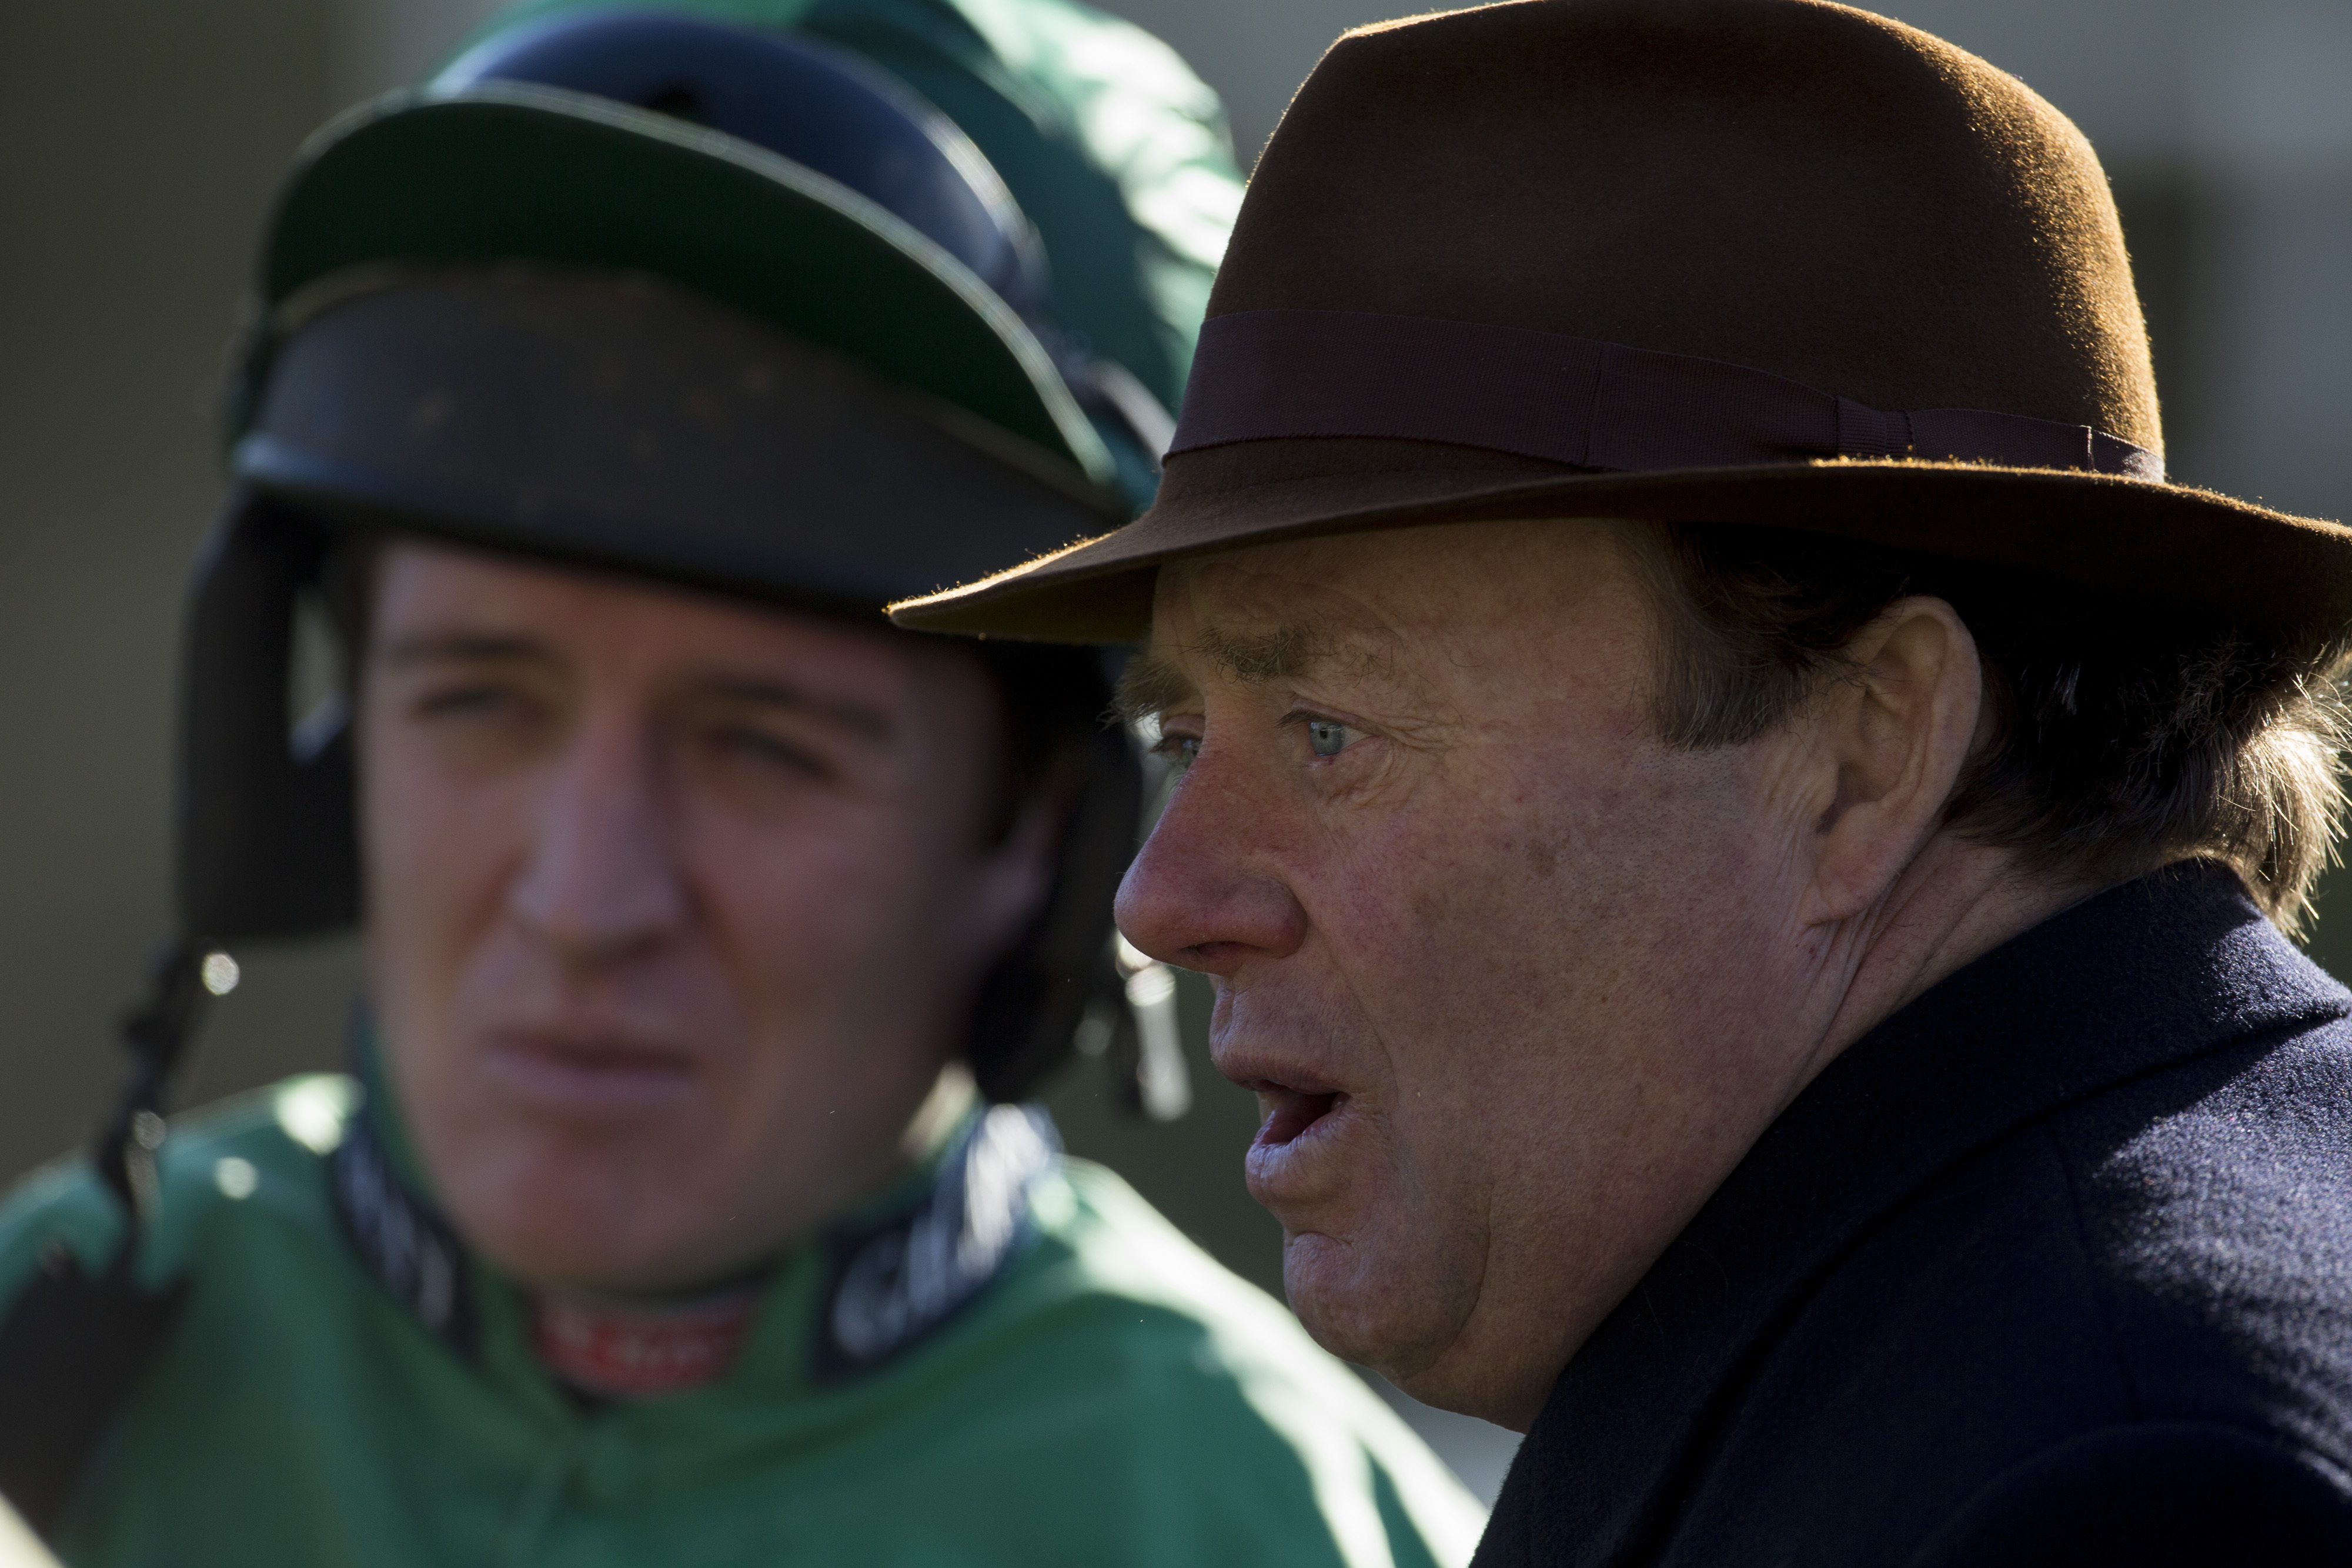 Barry Geraghty and Nicky Henderson go back a long way